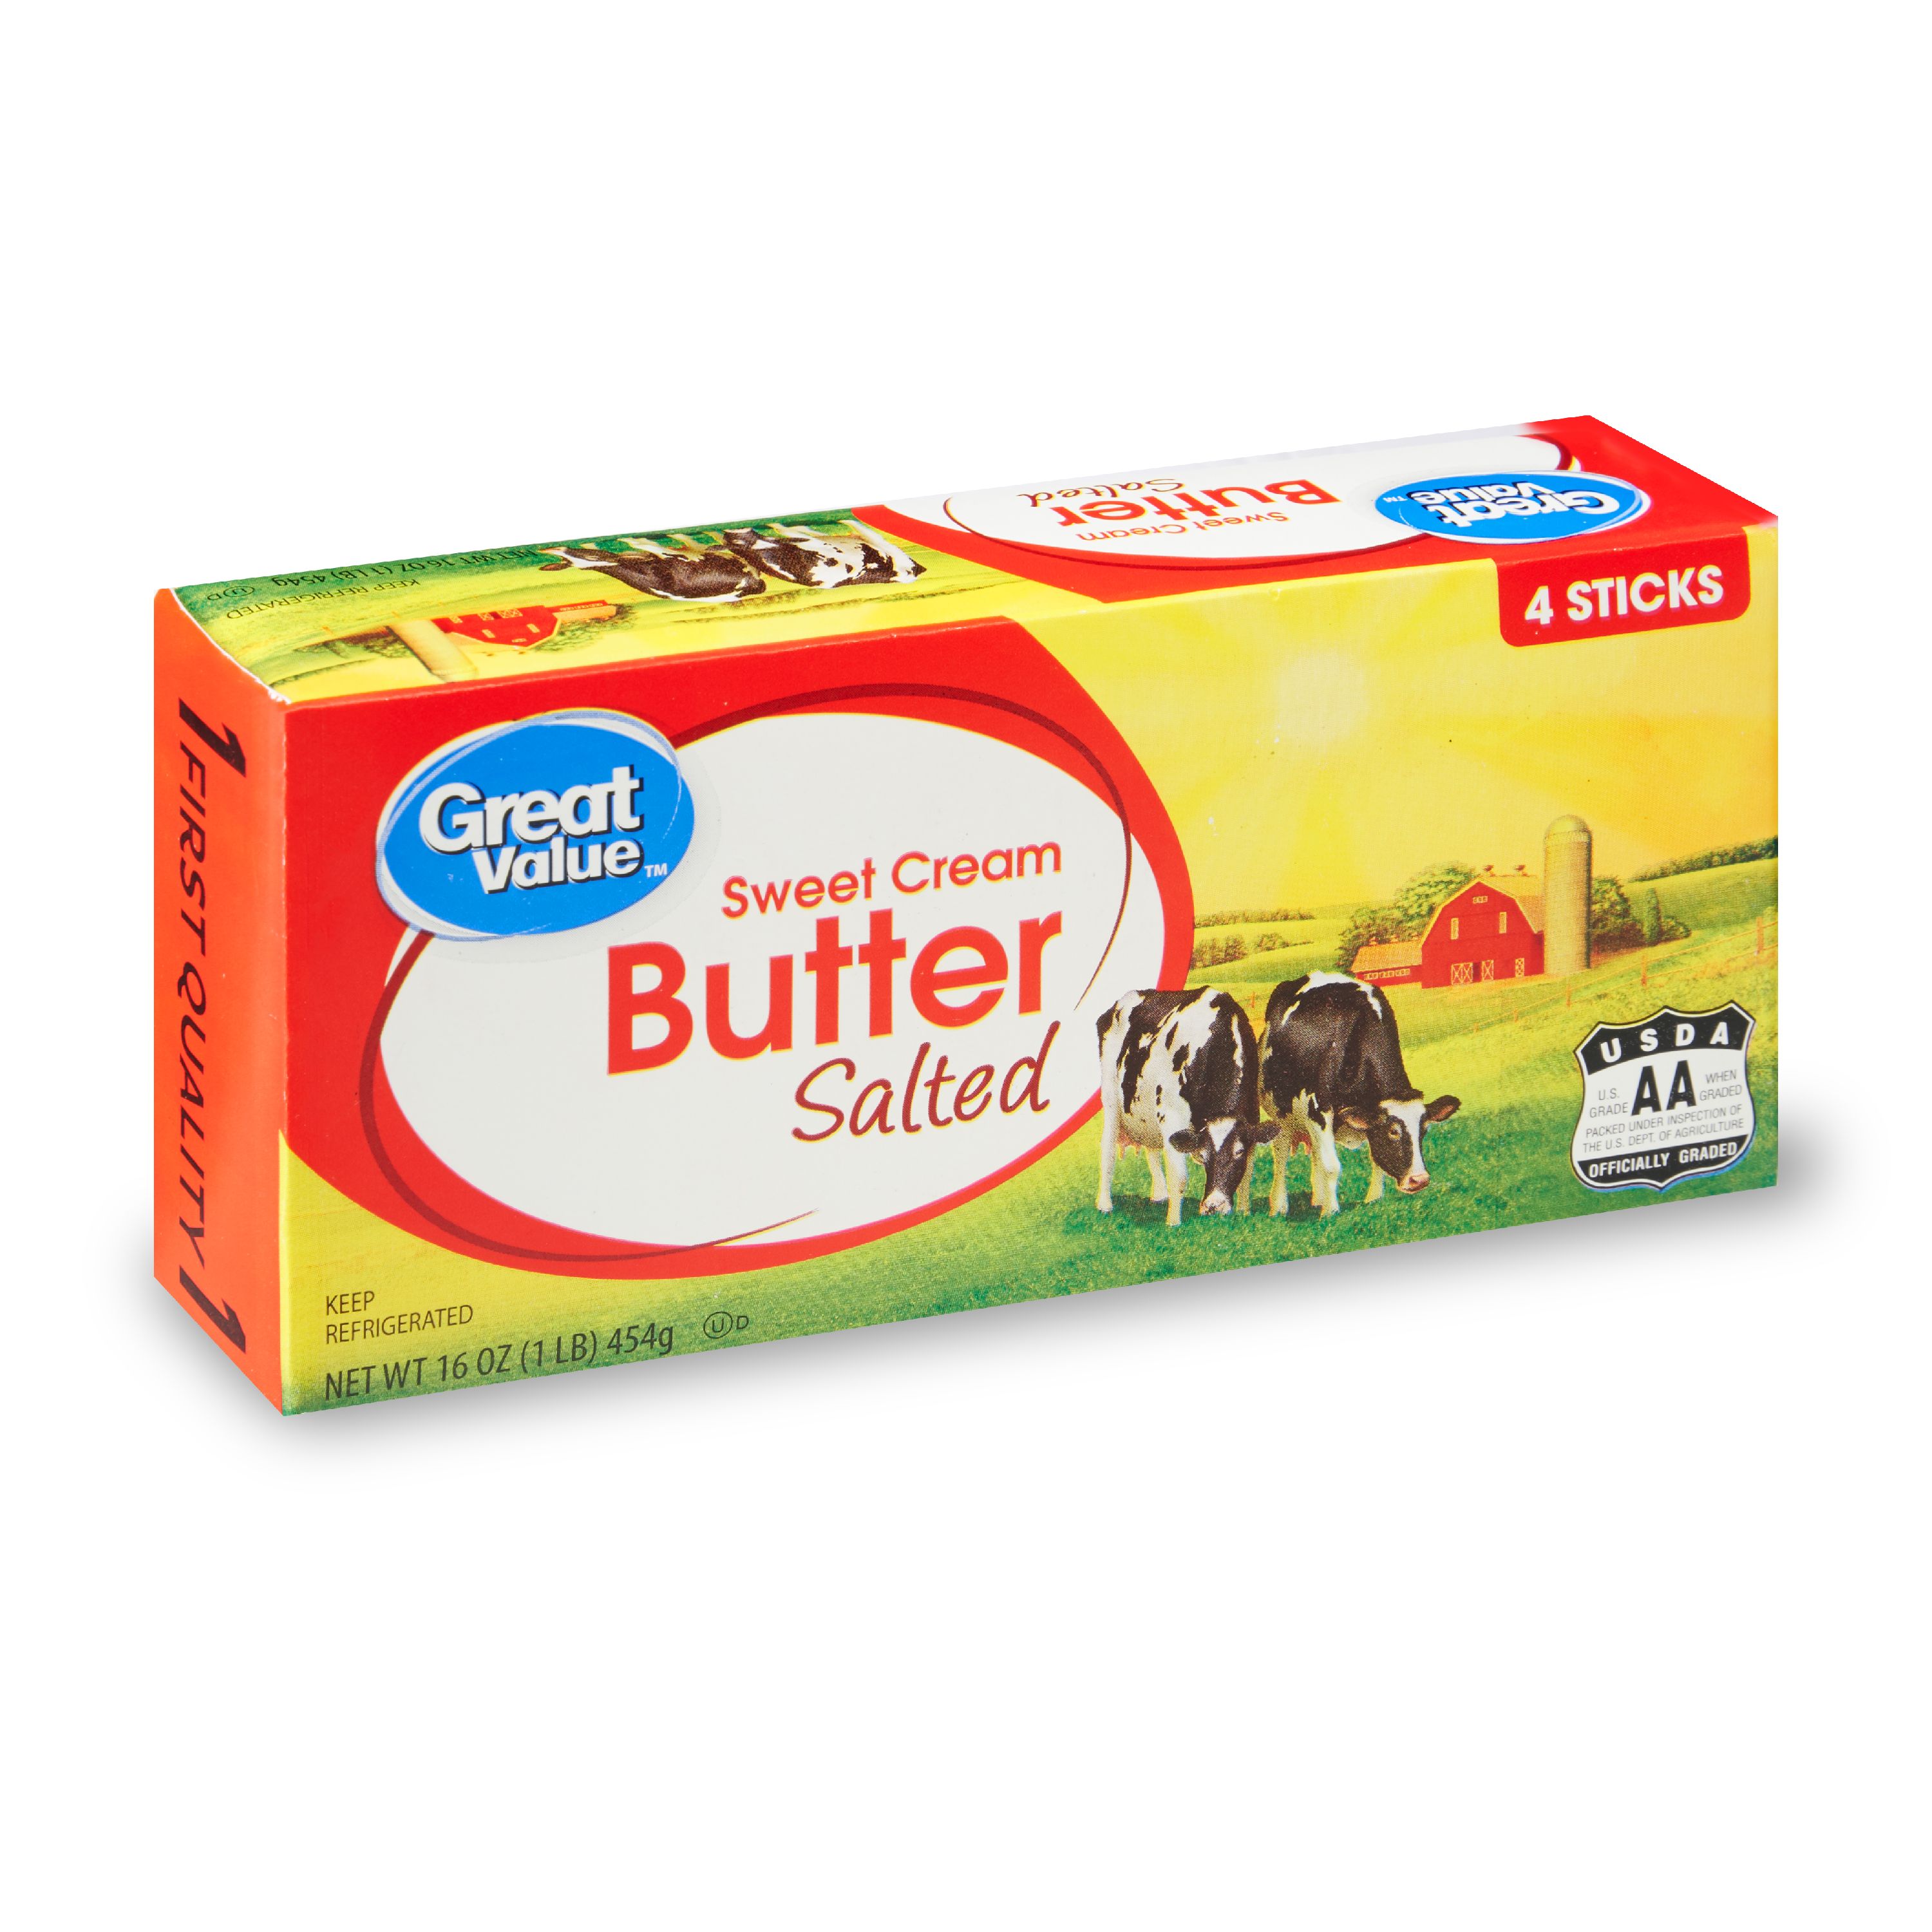 Great Value Sweet Cream Salted Butter Sticks, 4 Ct, 16 Oz Image